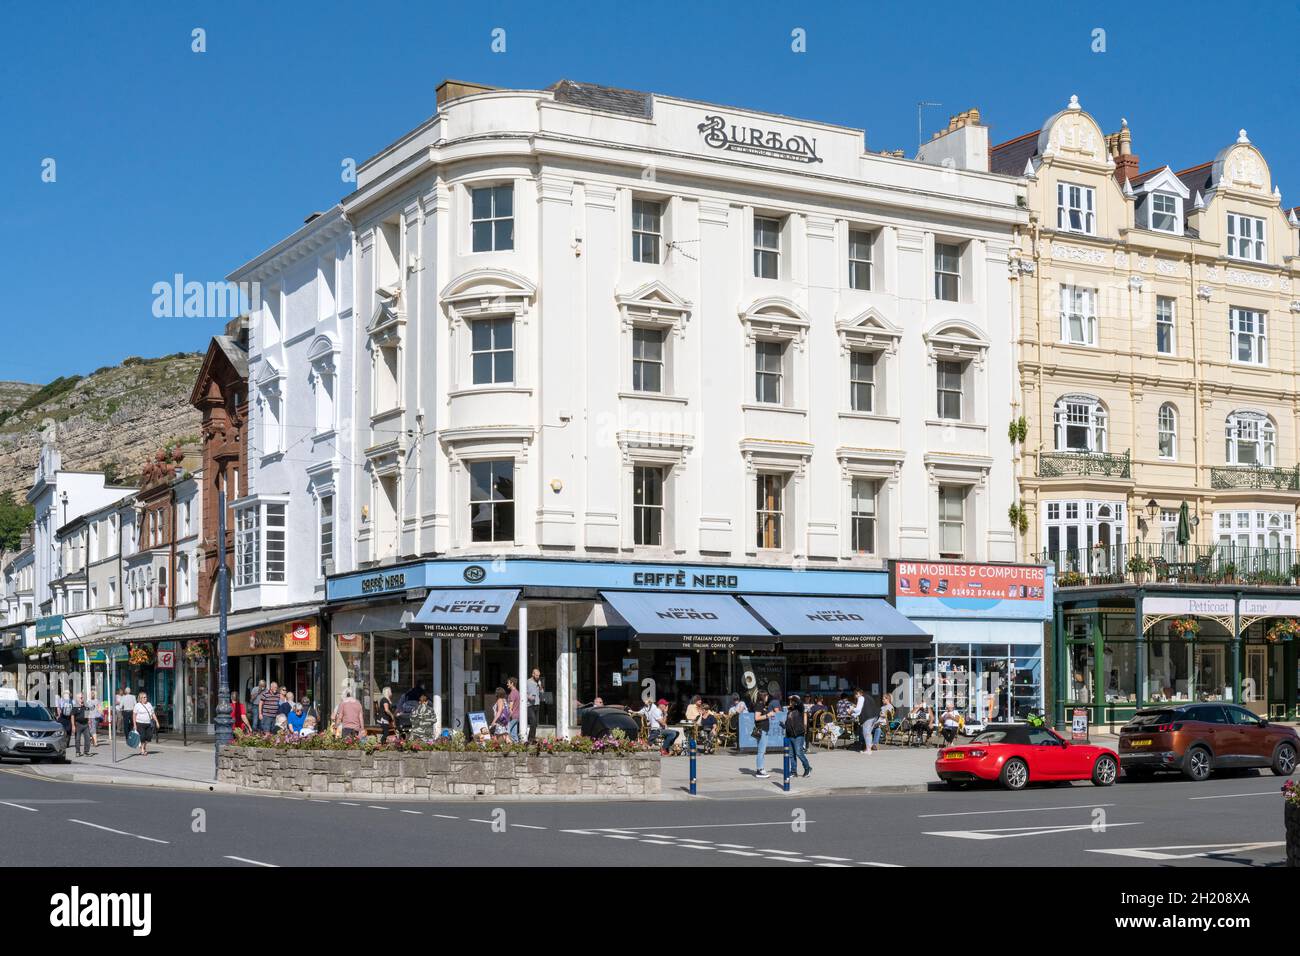 St Georges Place, Llandudno town centre, Llandudno, Clwyd, North Wales, Wales, UK Stock Photo